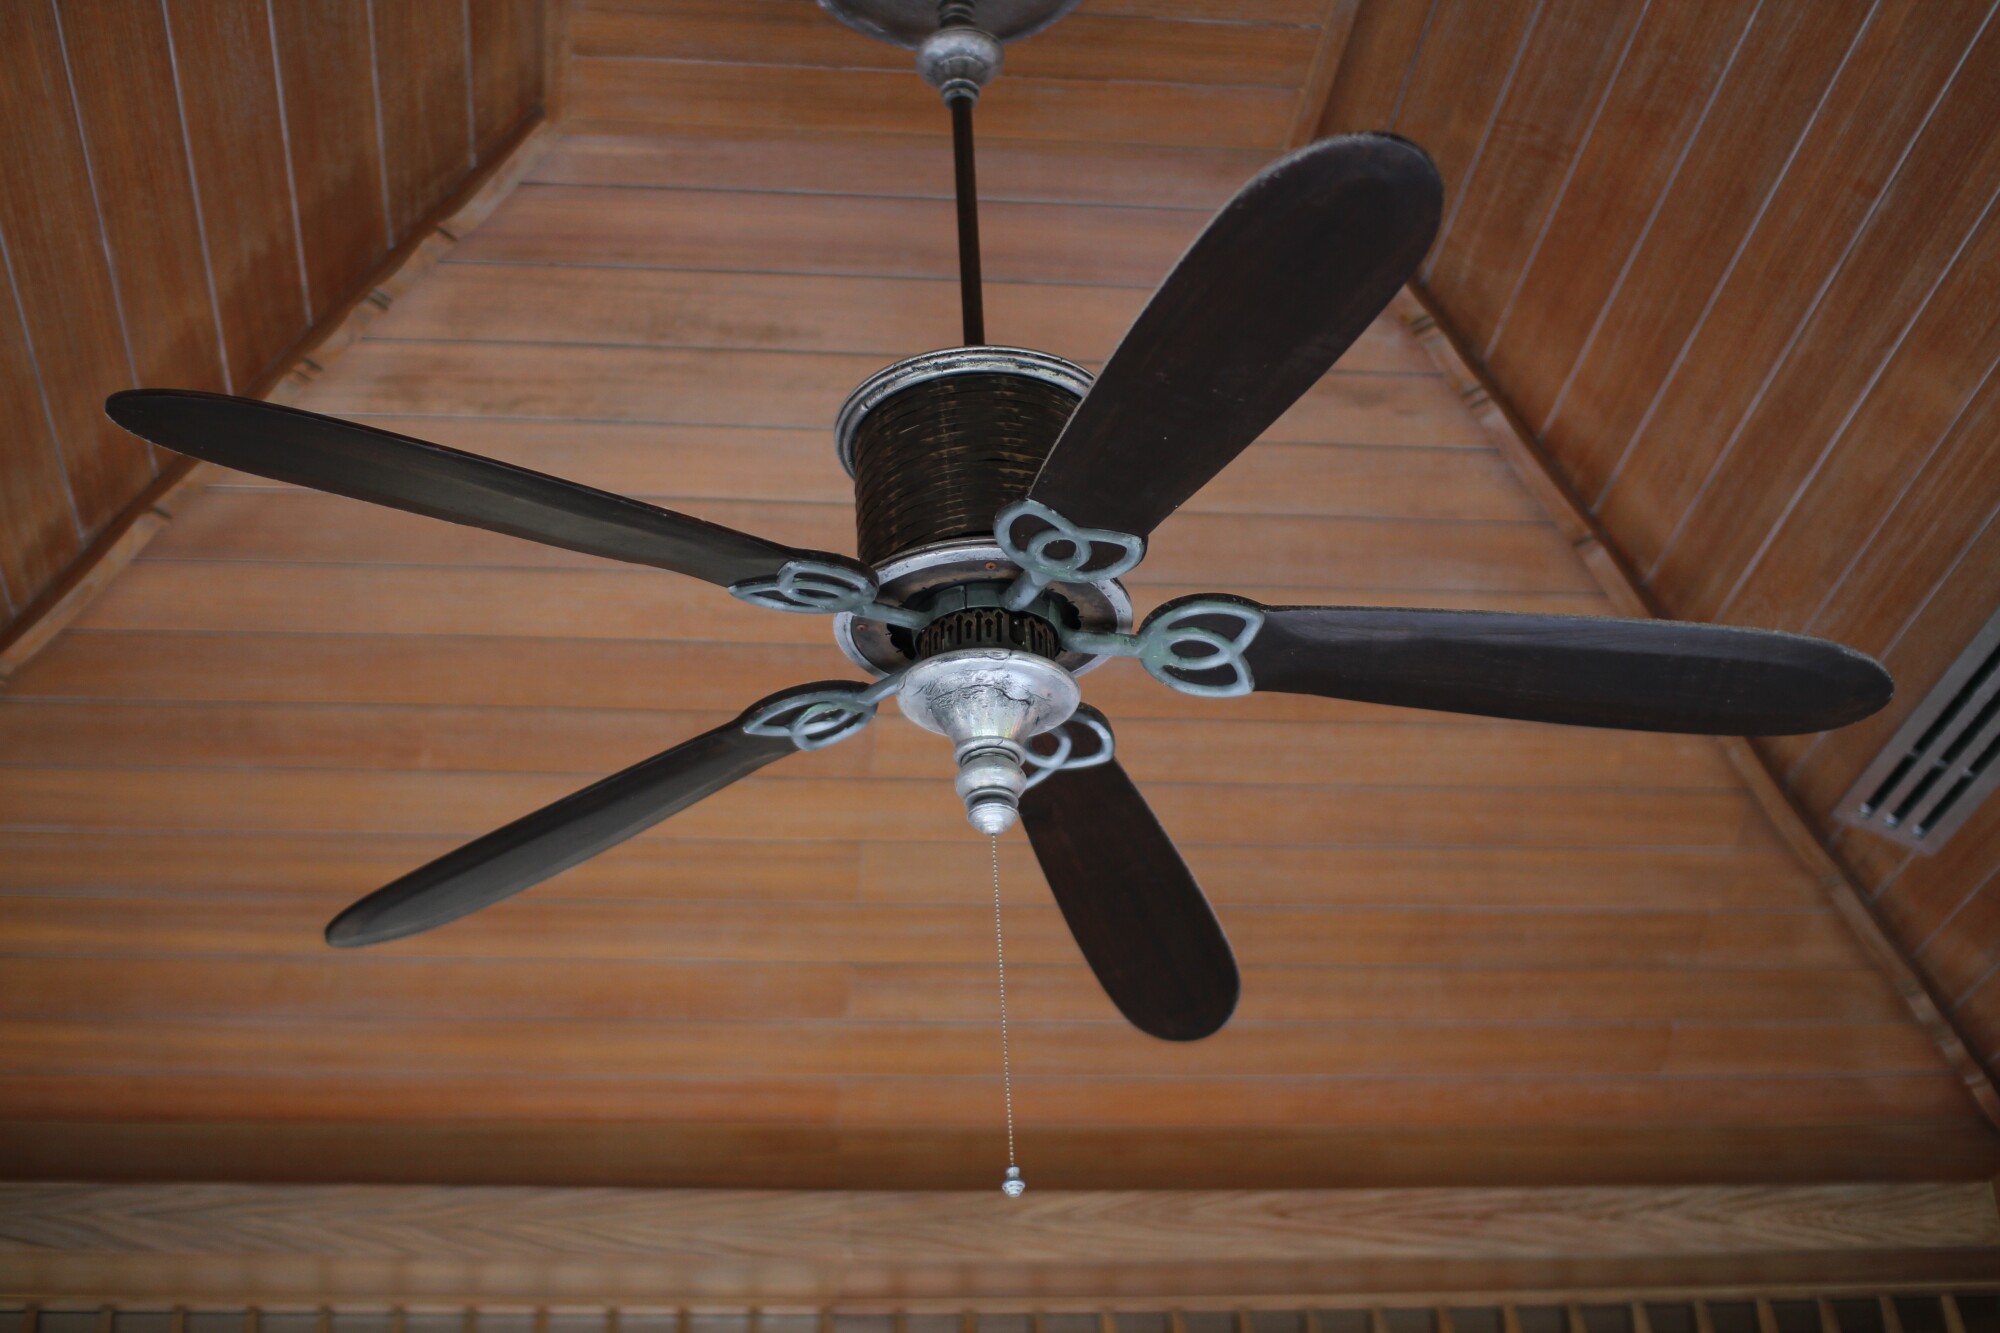 How to Cool Your House Down Without Using an Air Conditioner